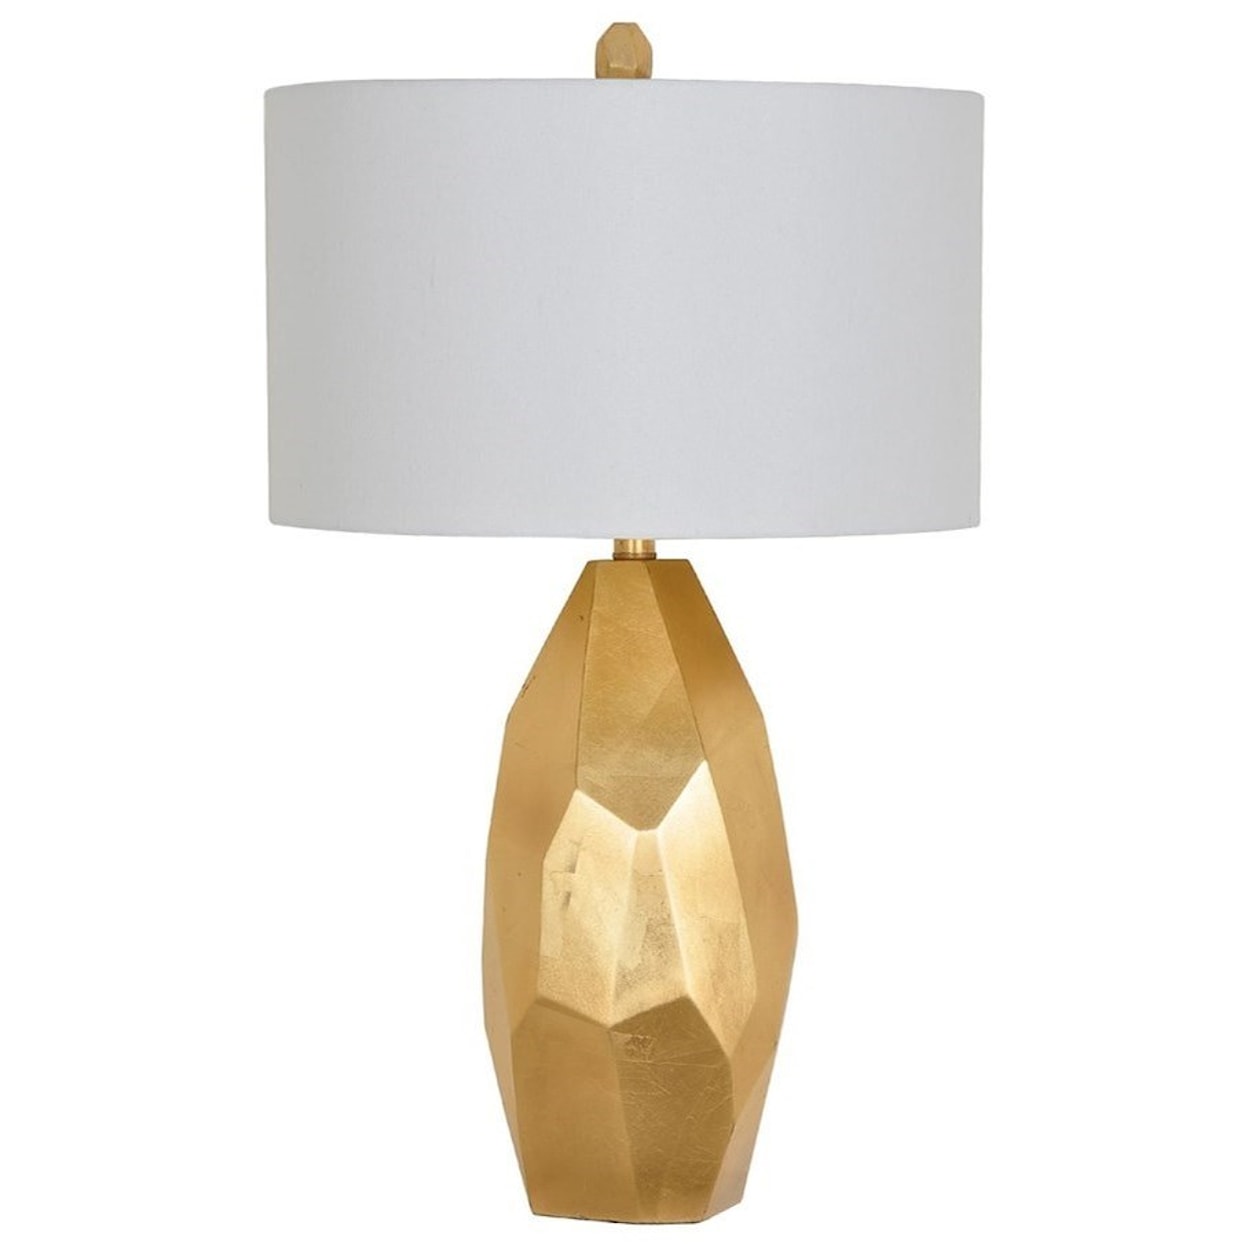 Crestview Collection Lighting Roxy Table Lamp